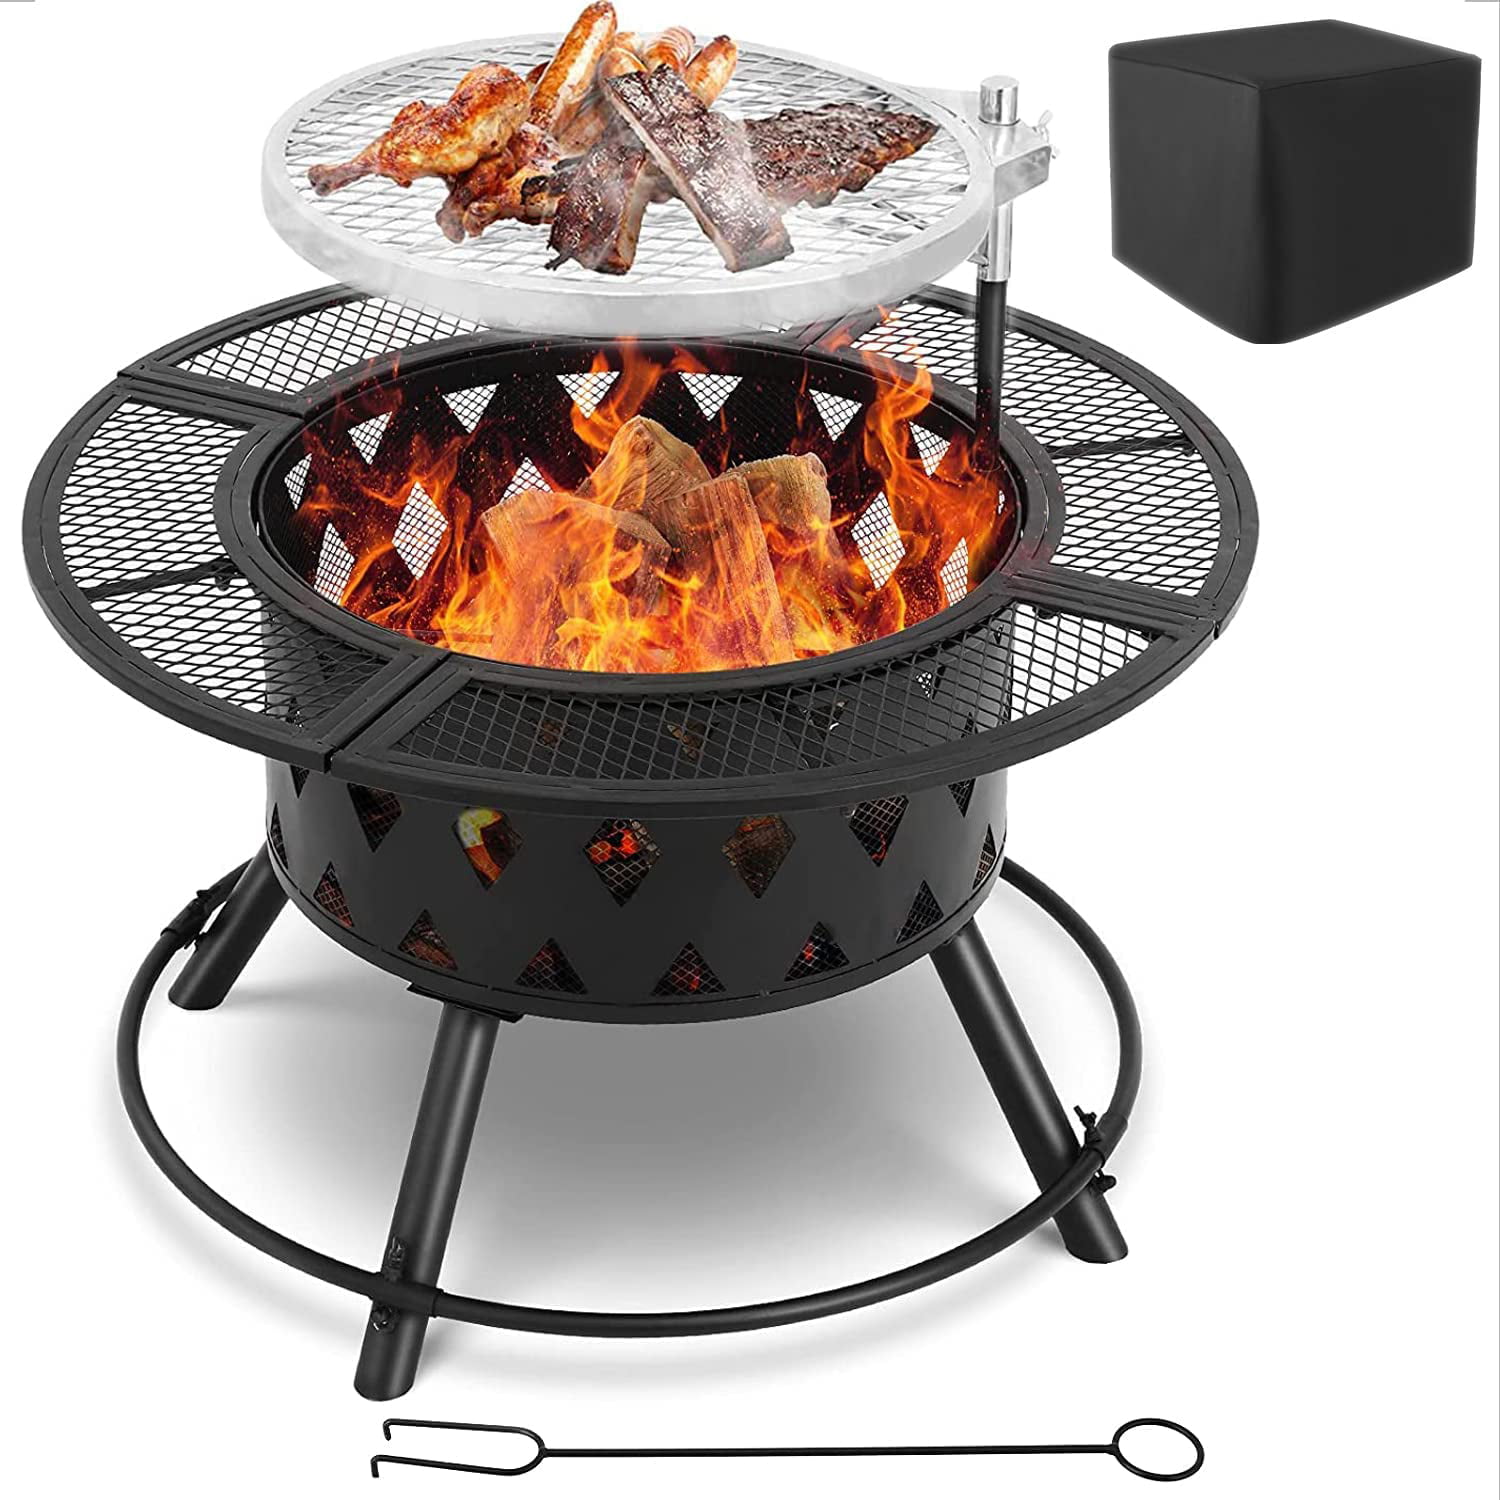 Cooking Grate Wood Burning Firepit Bowl, Iron Grate For Fire Pit